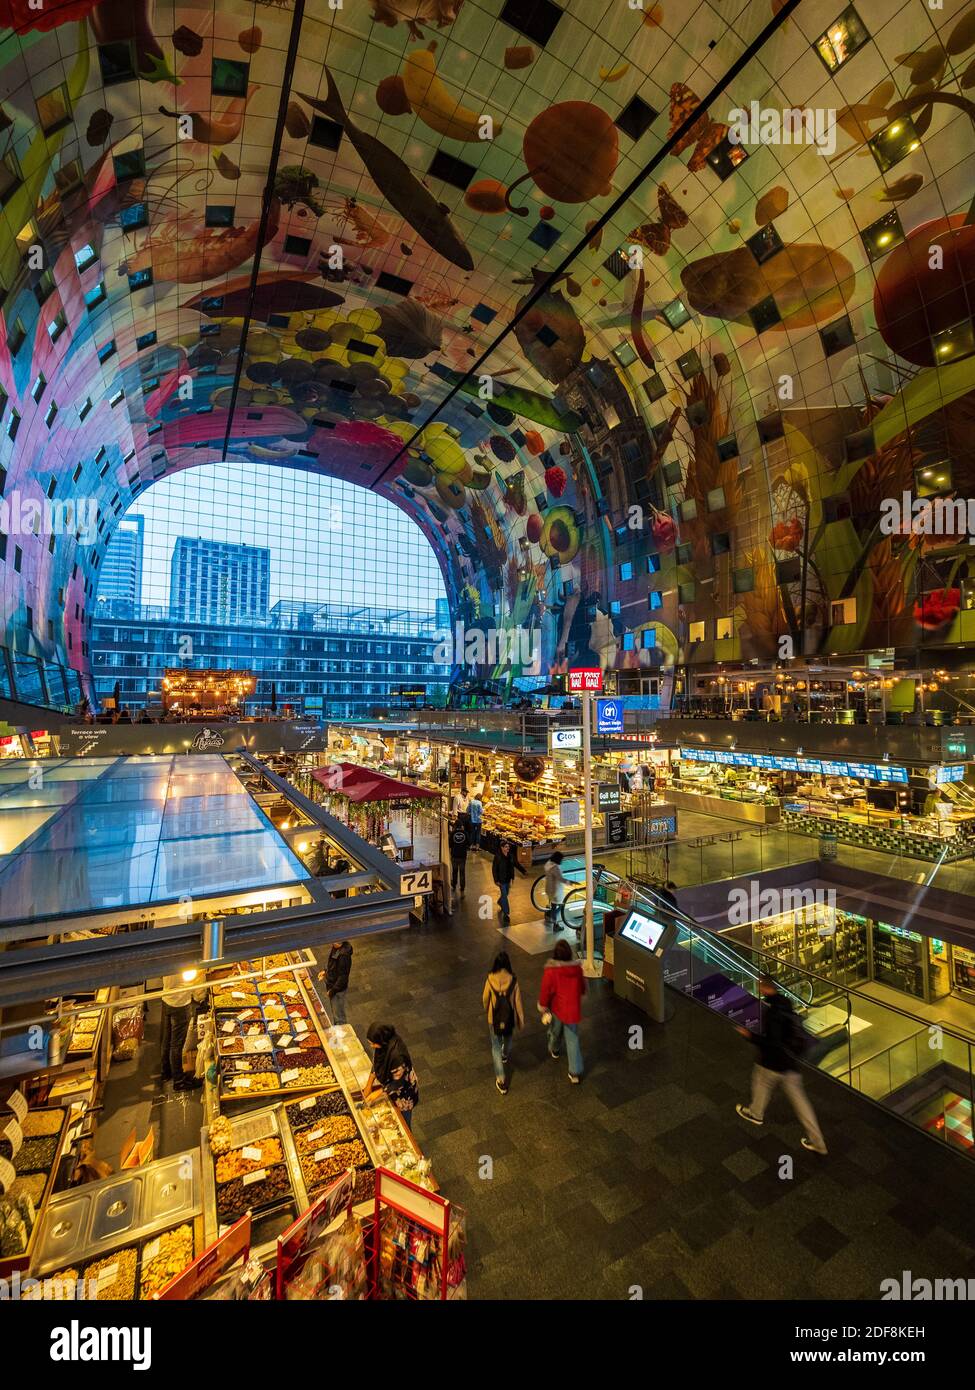 Rotterdam Markthal Rotterdam Market Hall Interior opened 2014, a large market hall with residential apartments and offices above. Architect MVRDV Stock Photo